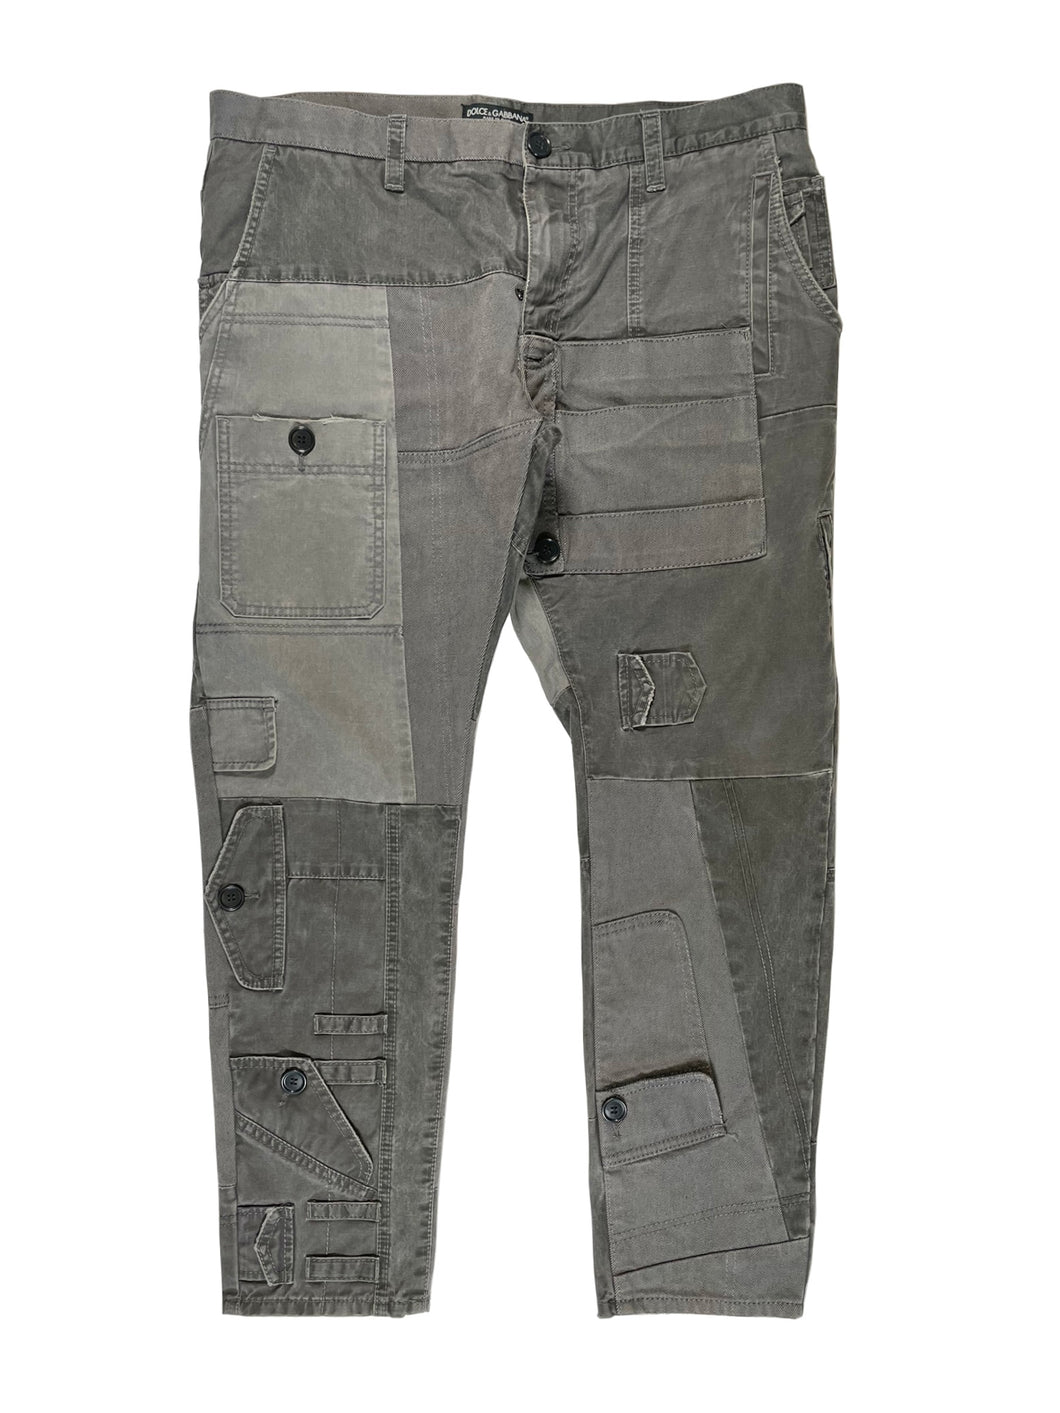 AW2011 Dolce & Gabbana patchwork reconstructed cargo pants